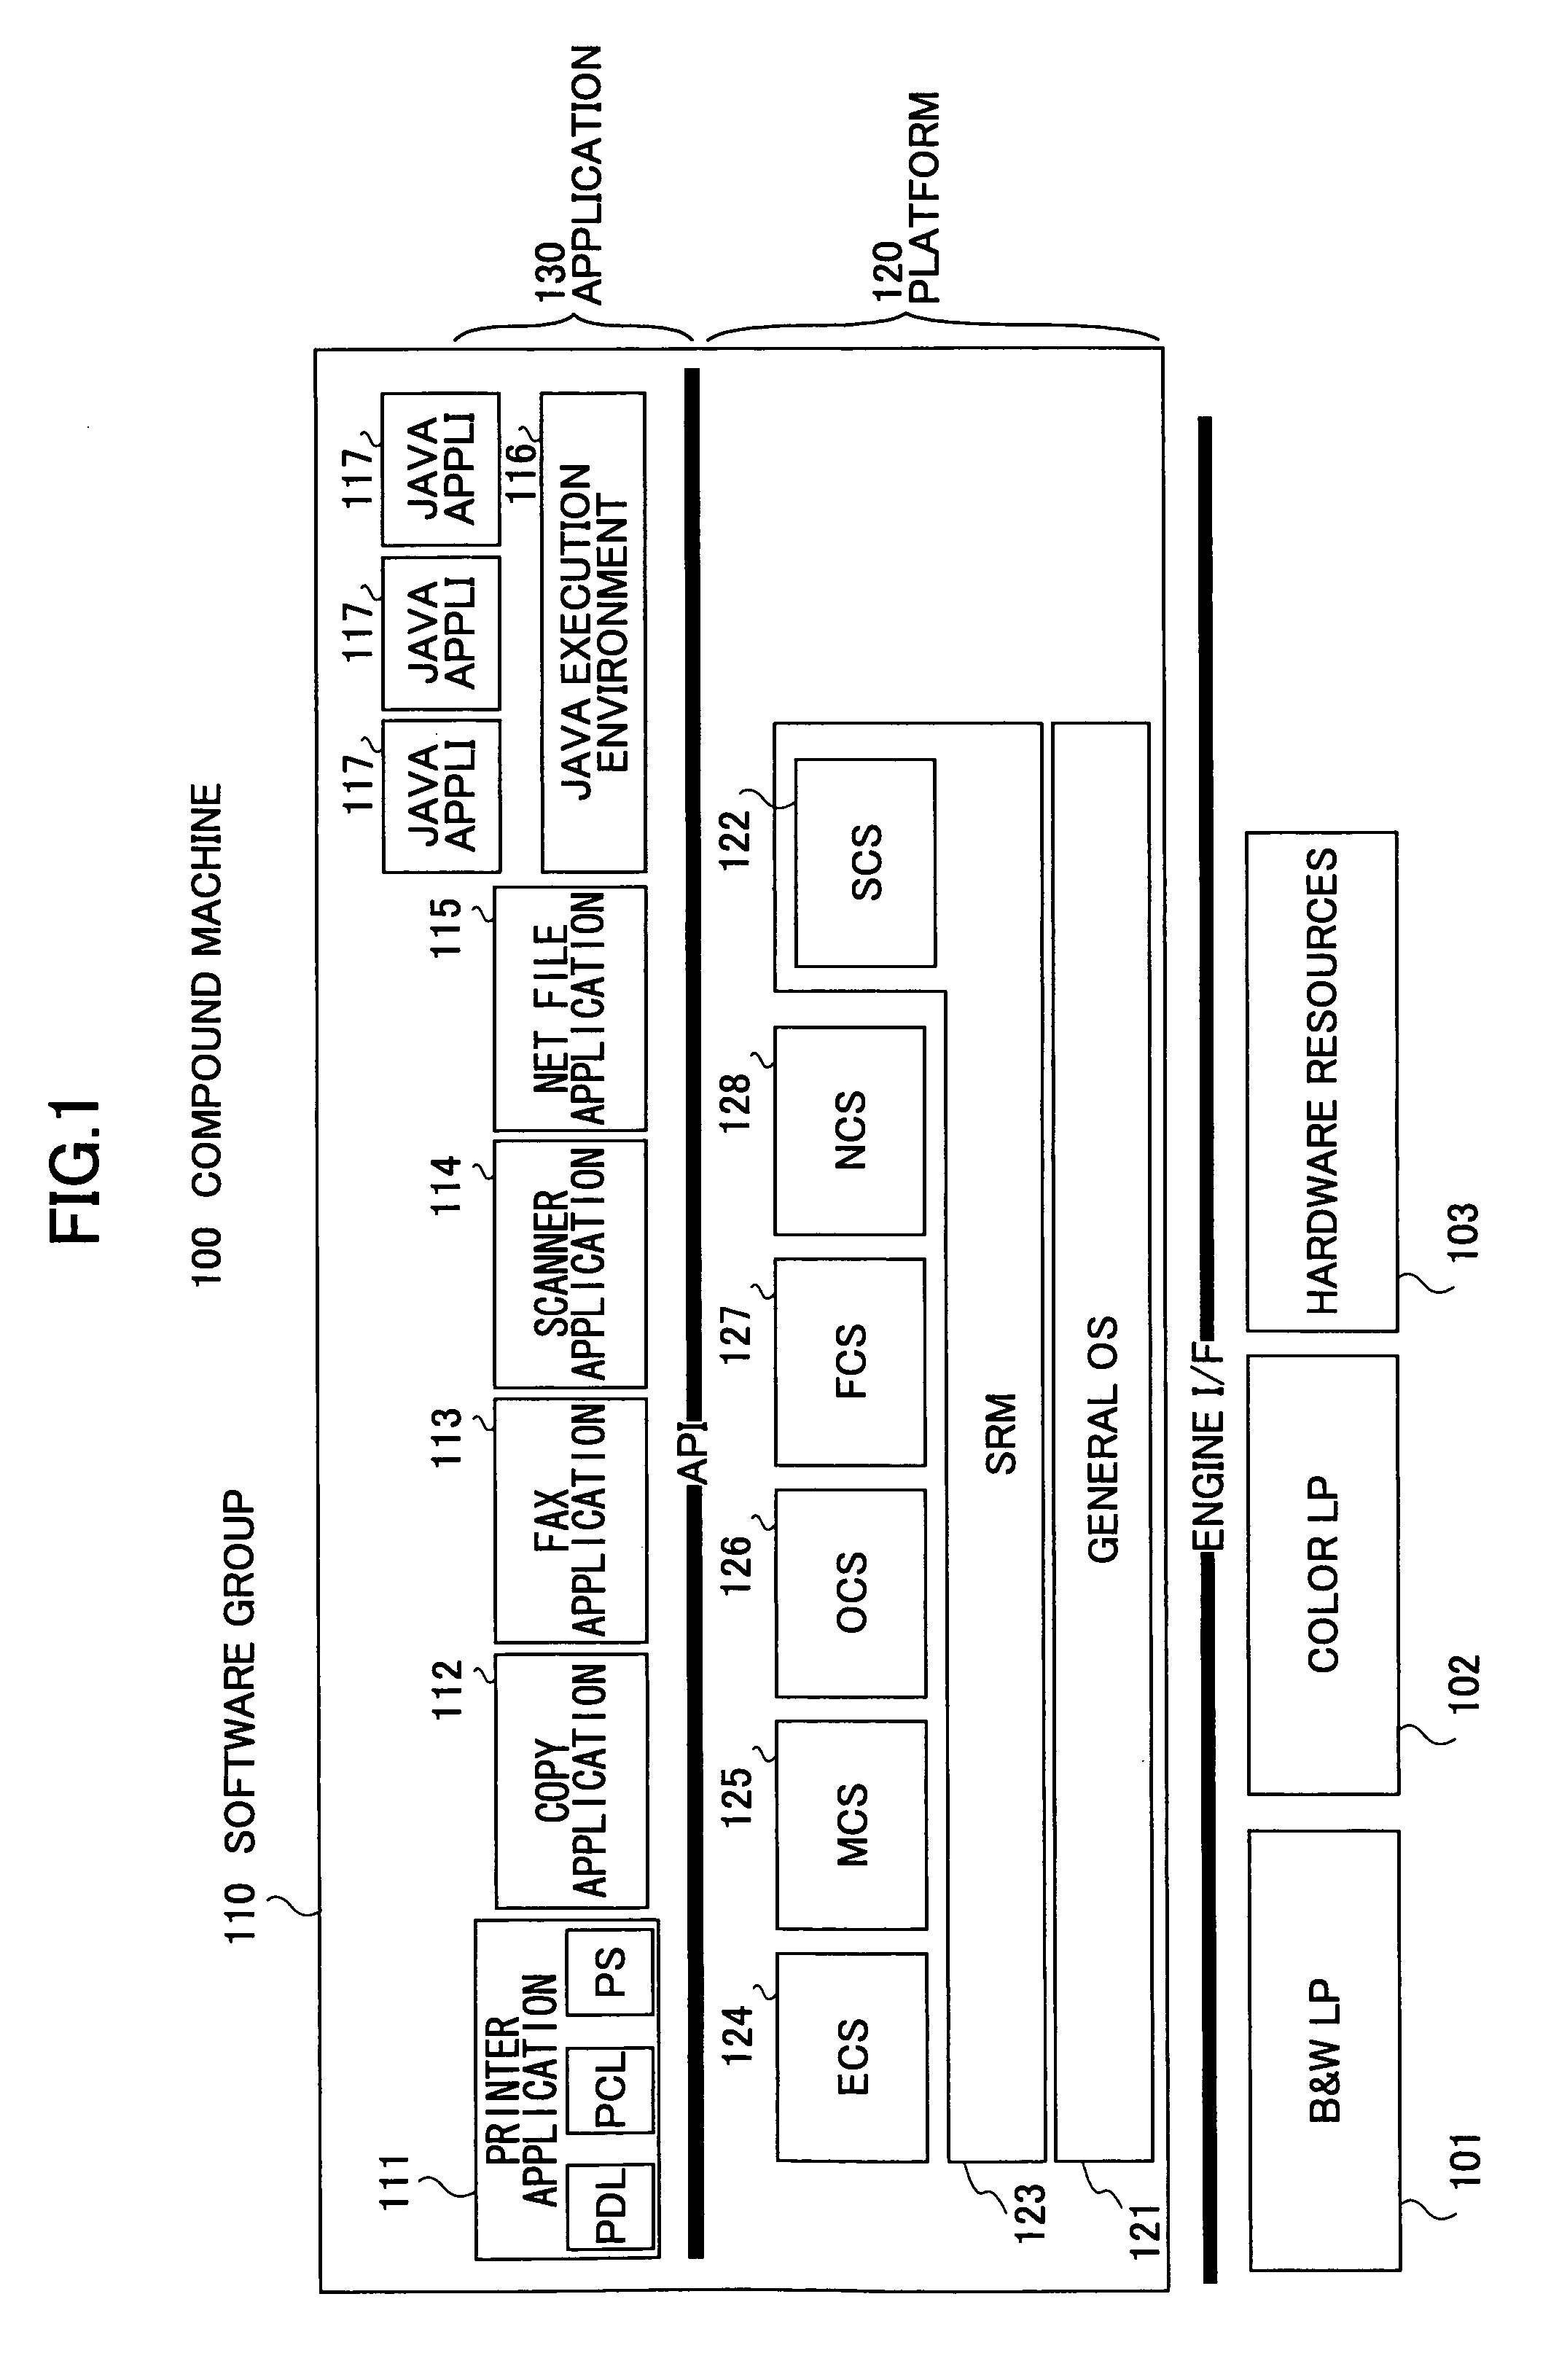 Image forming apparatus and method for operating image forming apparatus by using remote application